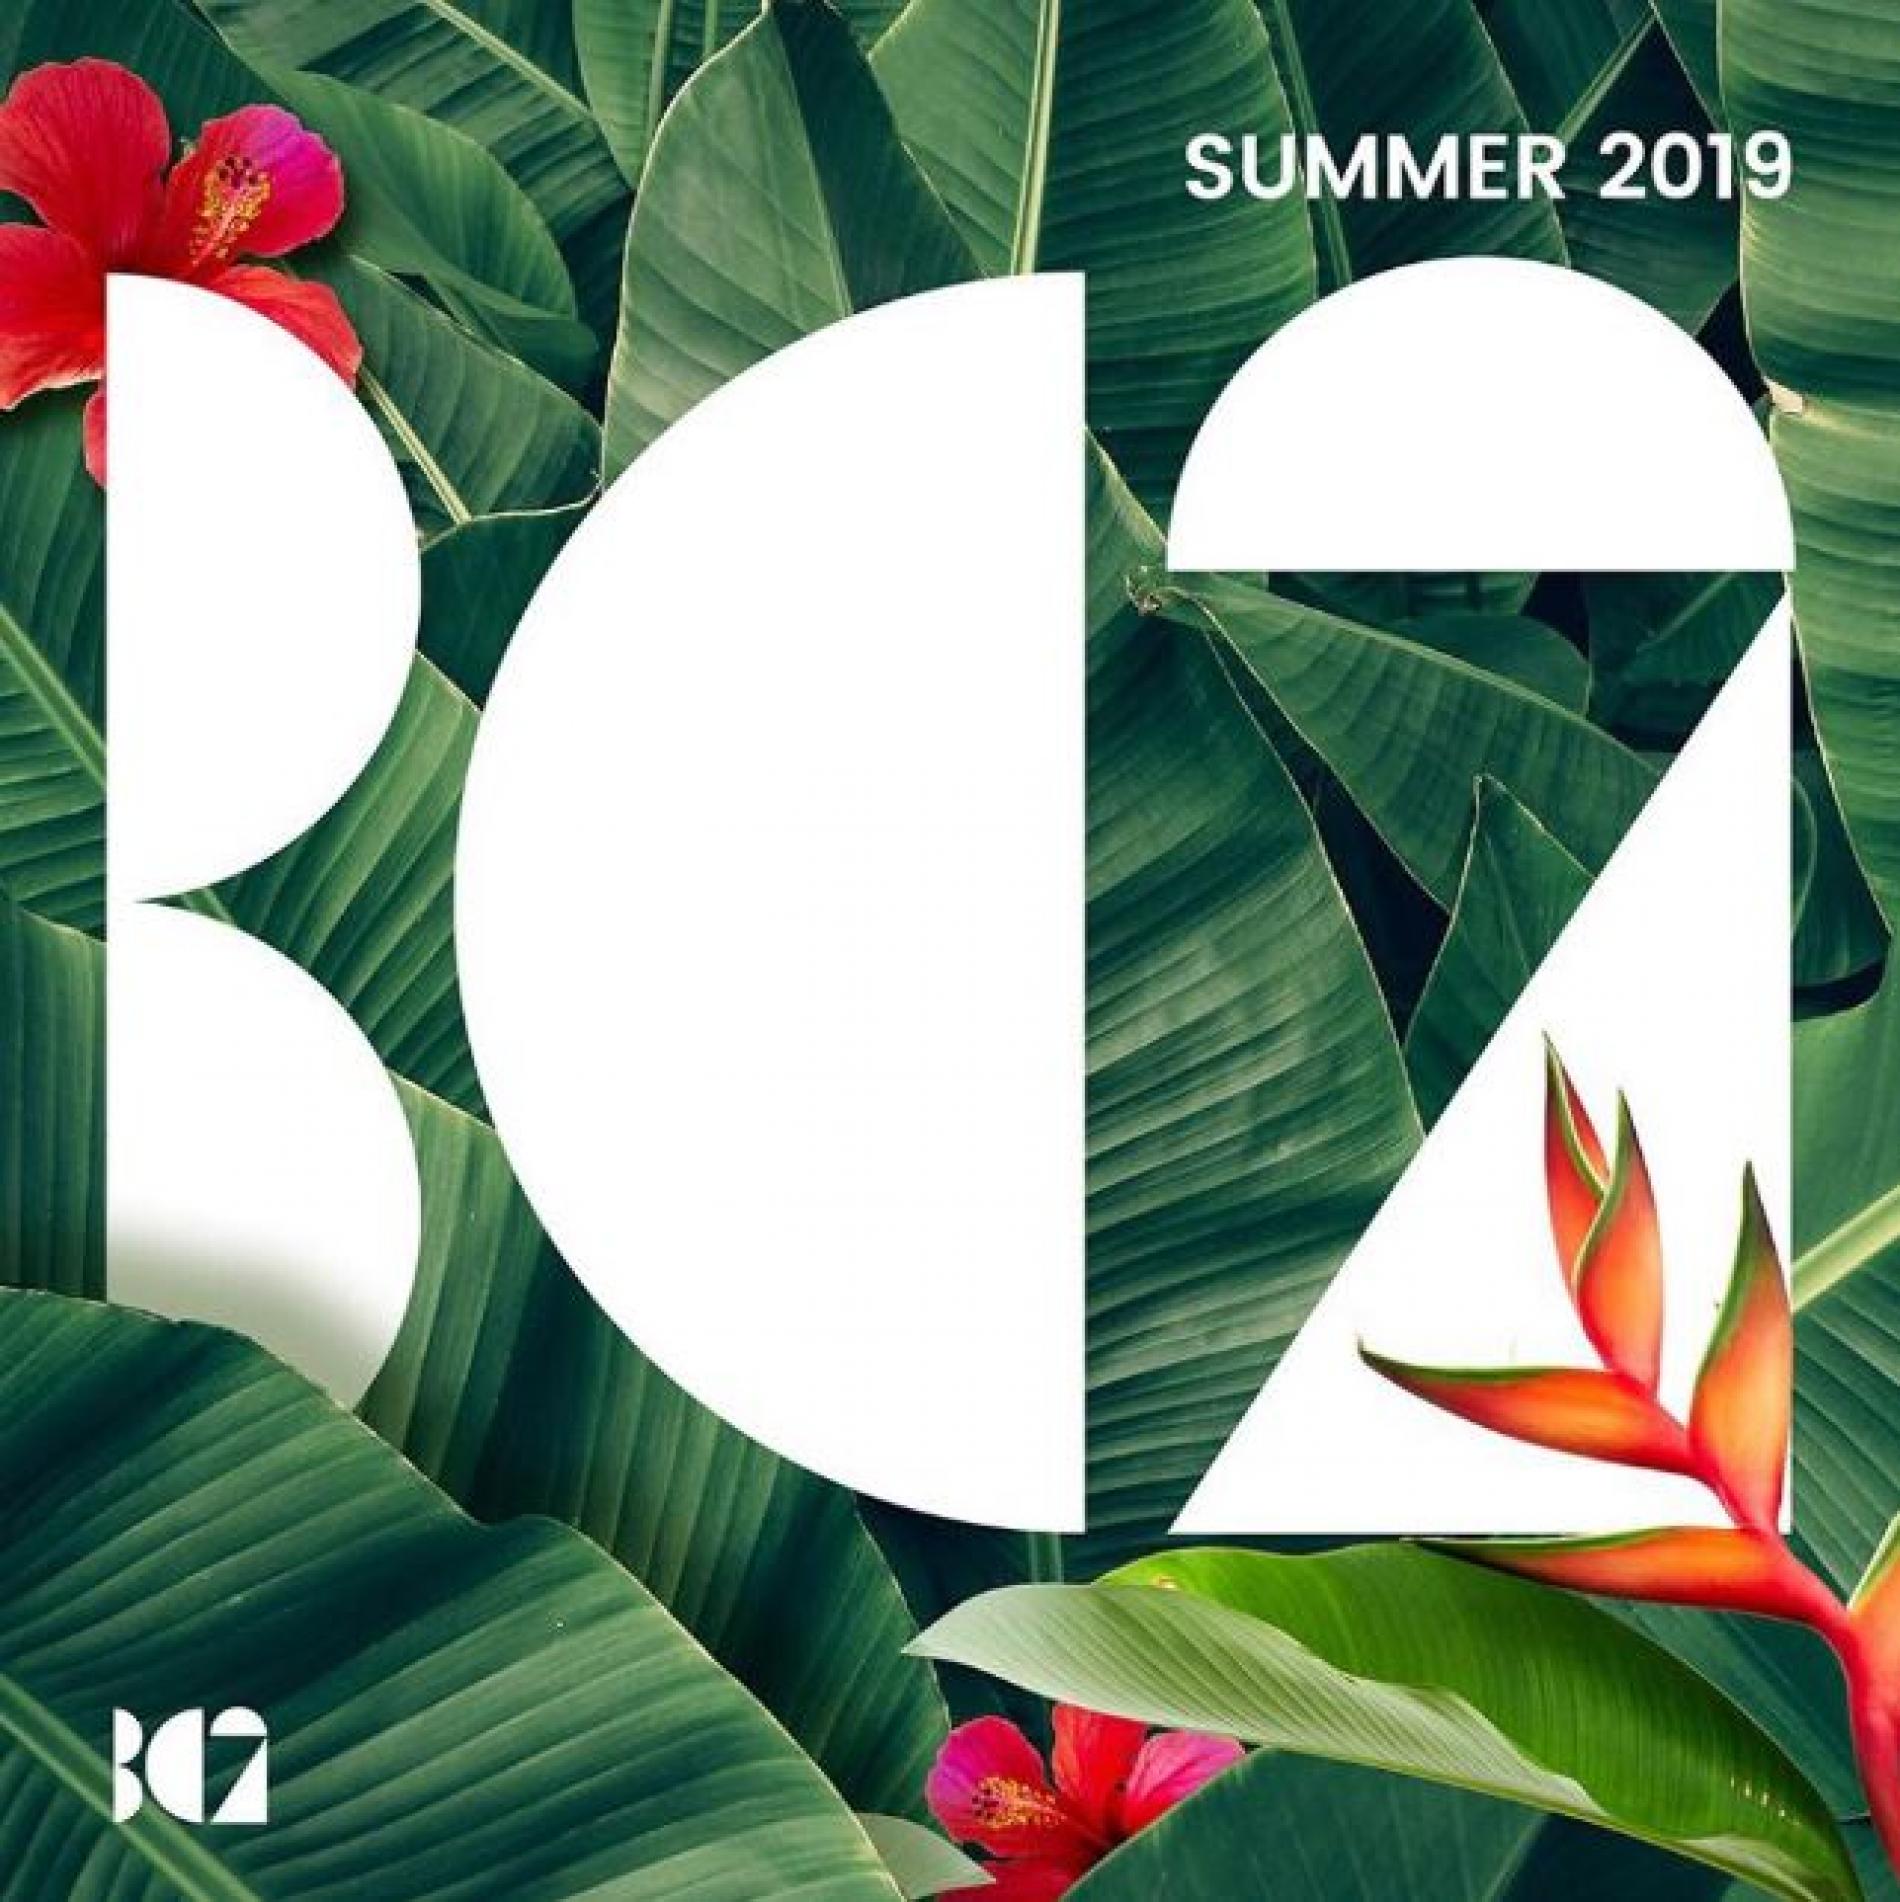 The BC2 Summer 2019 Compilation Is Out